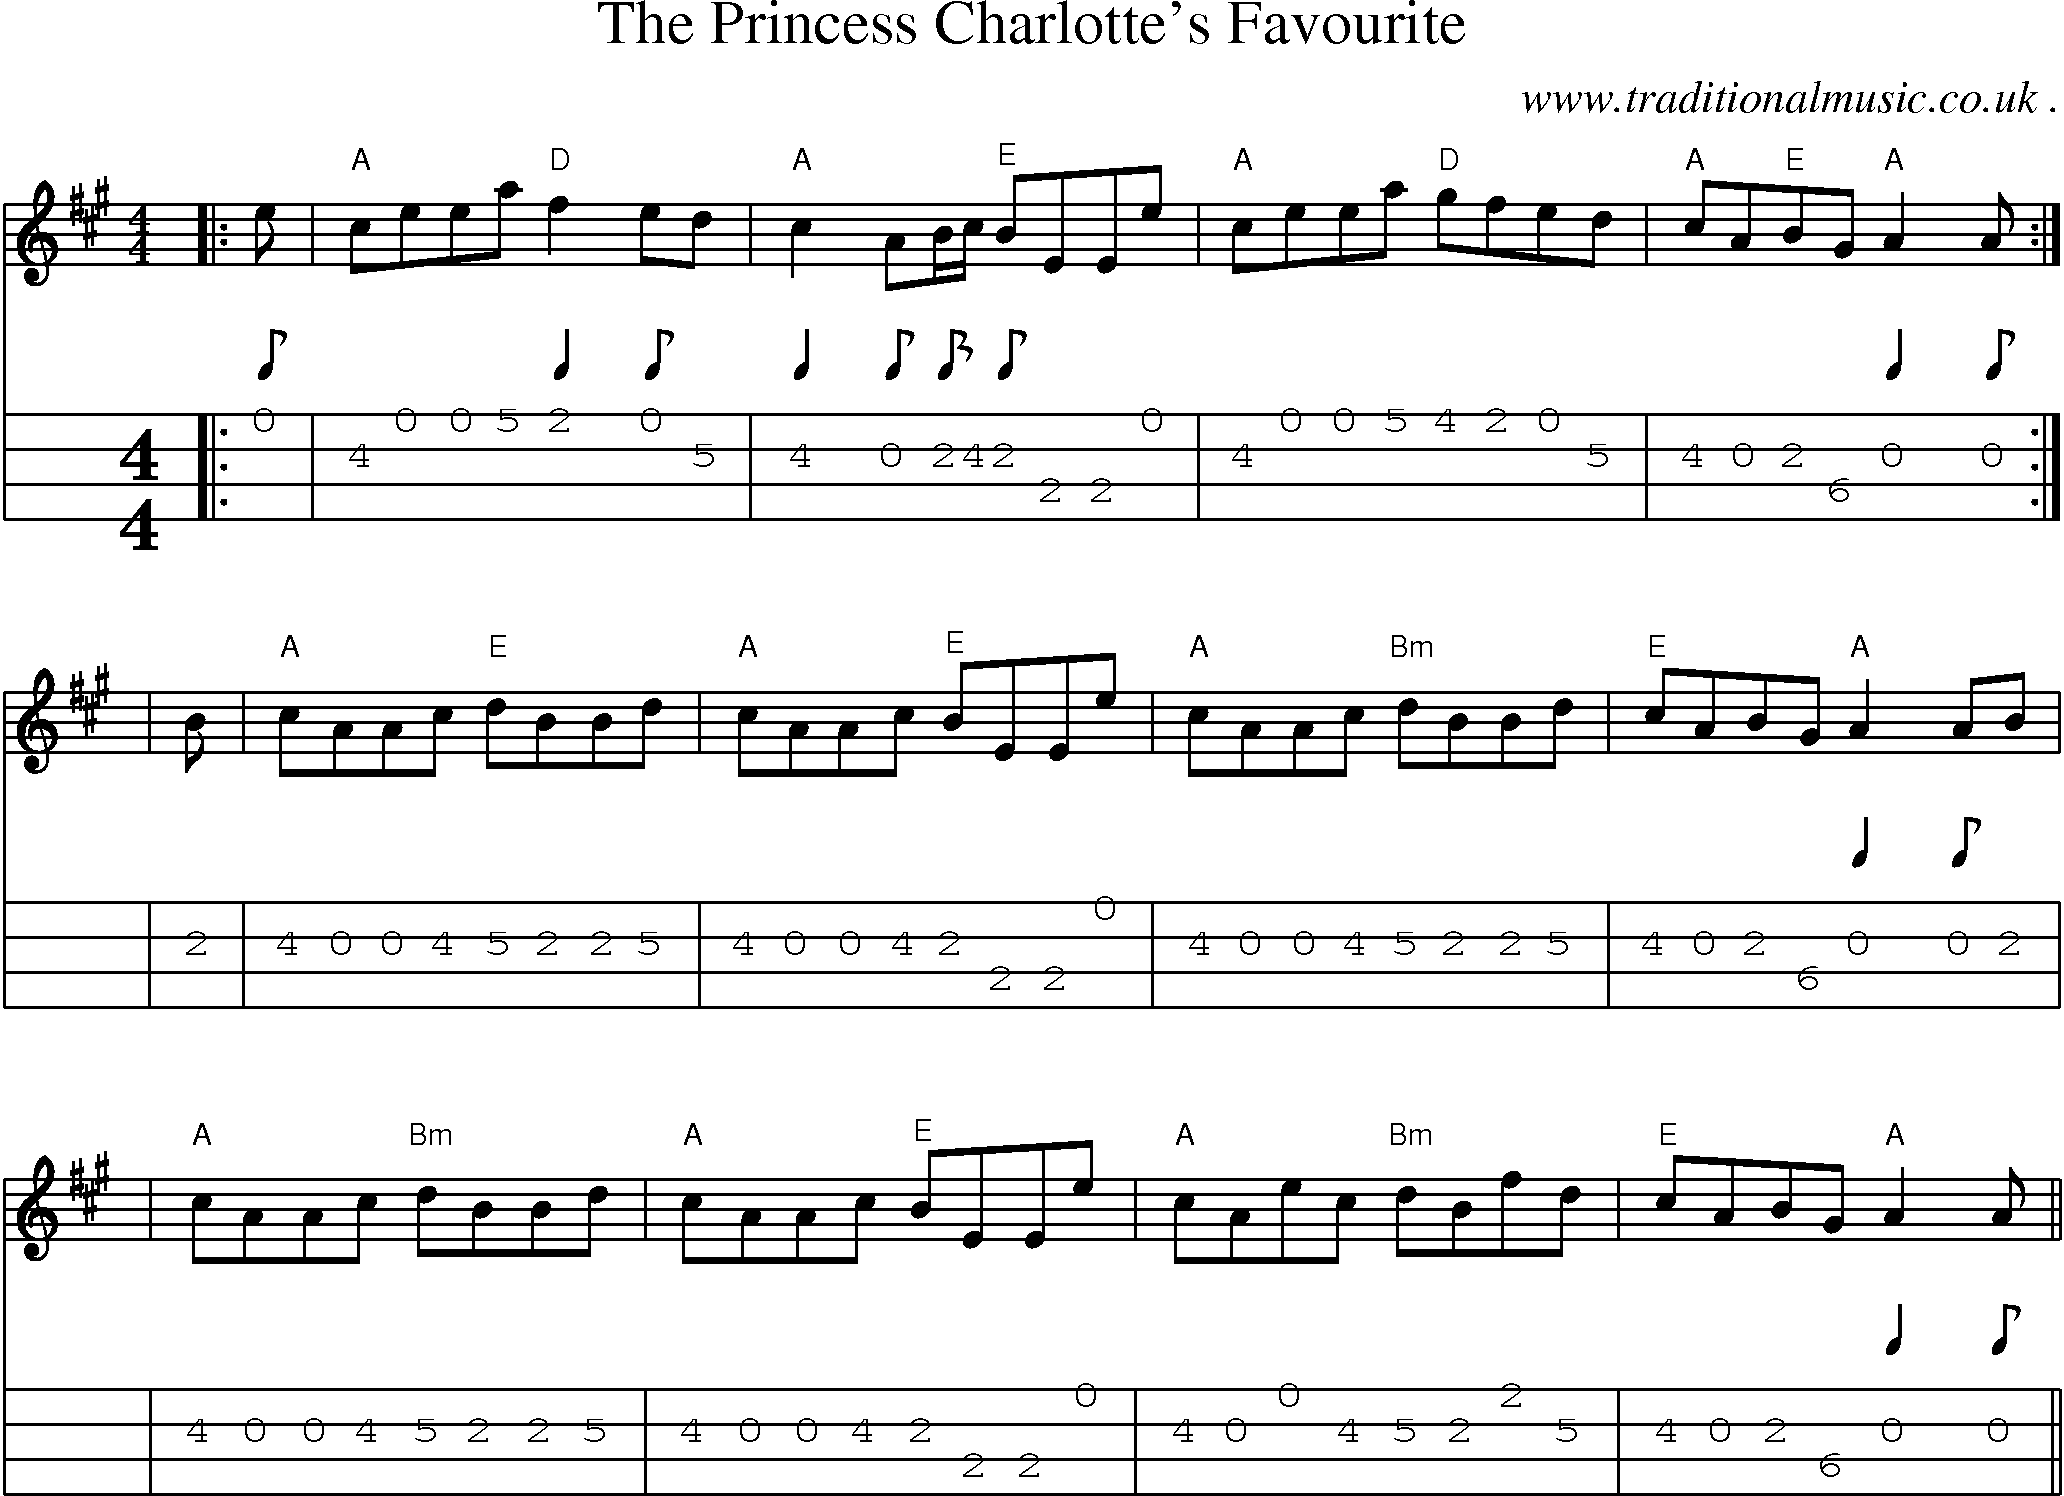 Sheet-music  score, Chords and Mandolin Tabs for The Princess Charlottes Favourite